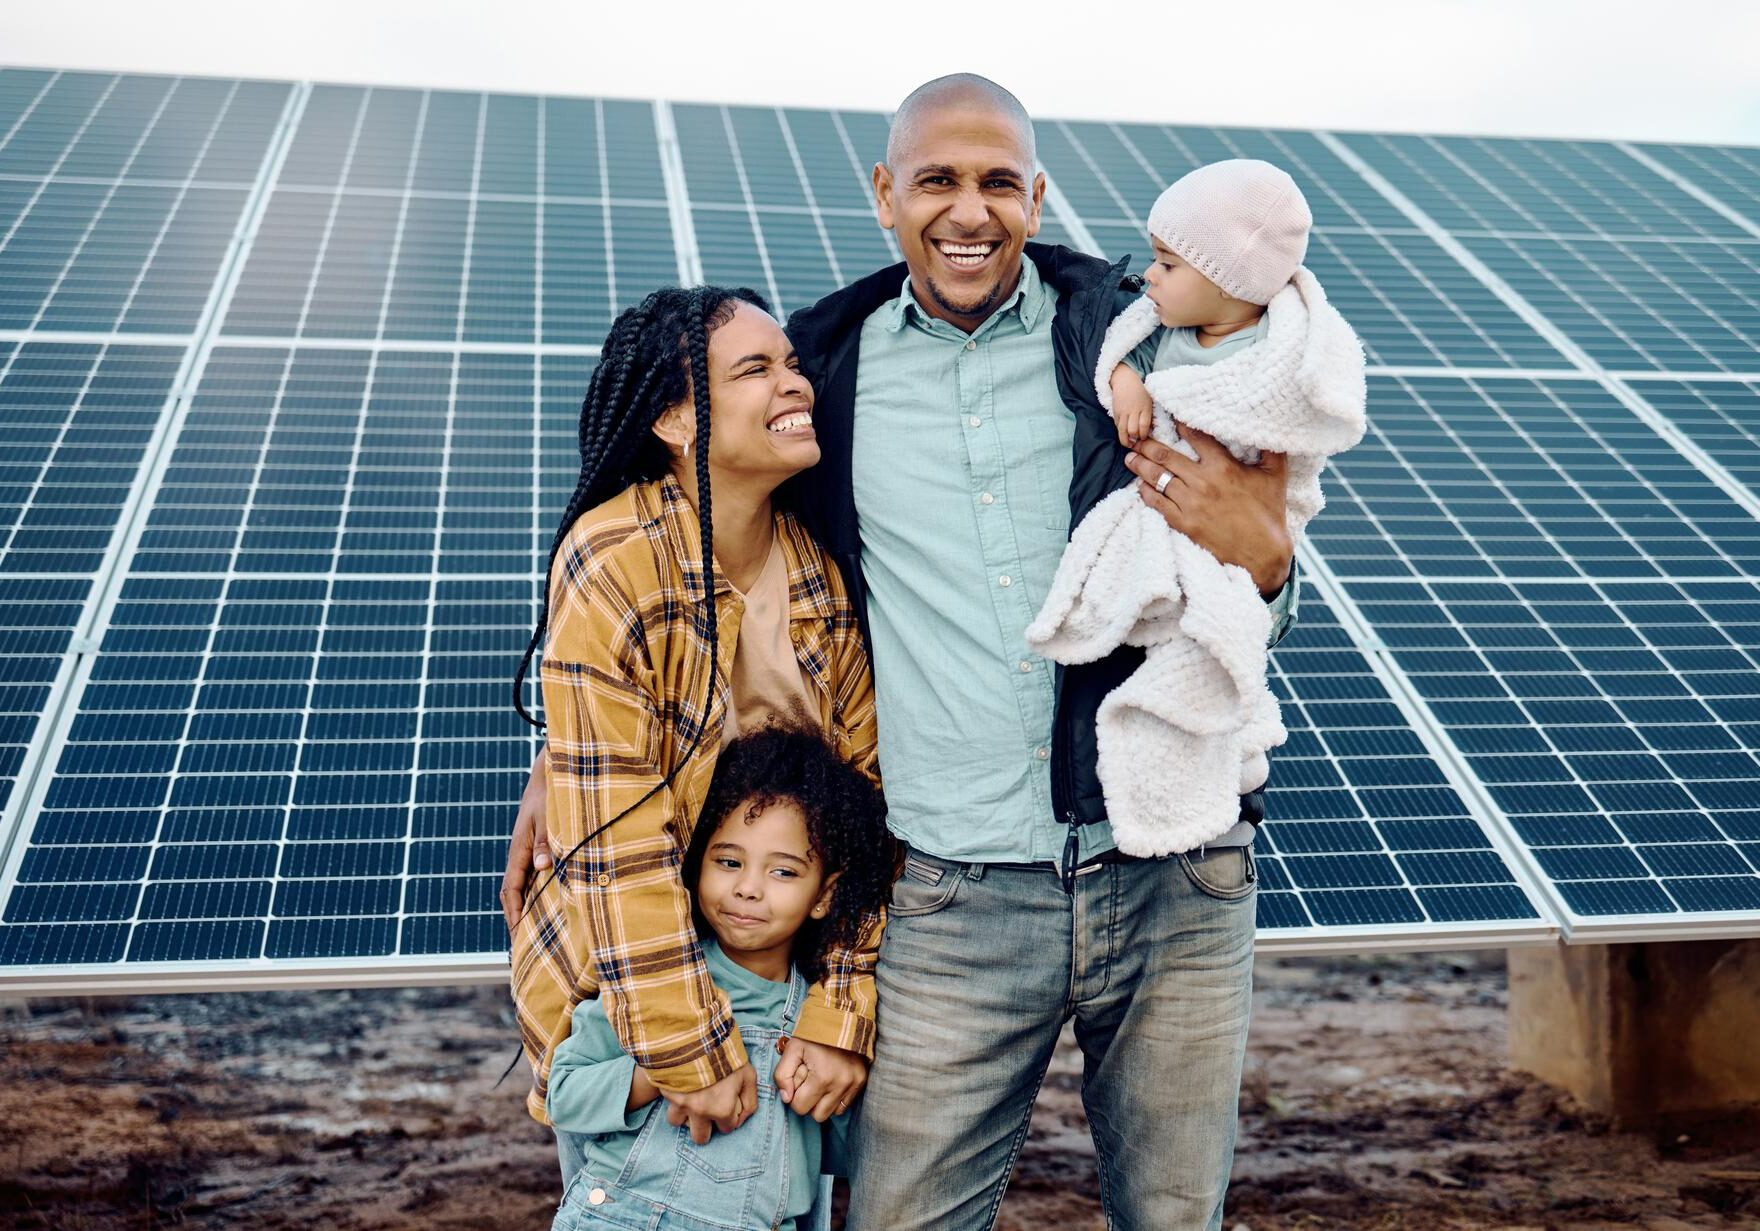 black-family-kids-solar-energy-with-parents-daughter-siblings-farm-together-sustainability-children-love-electricity-with-man-woman-girls-bonding-outdoor-agriculture (2)